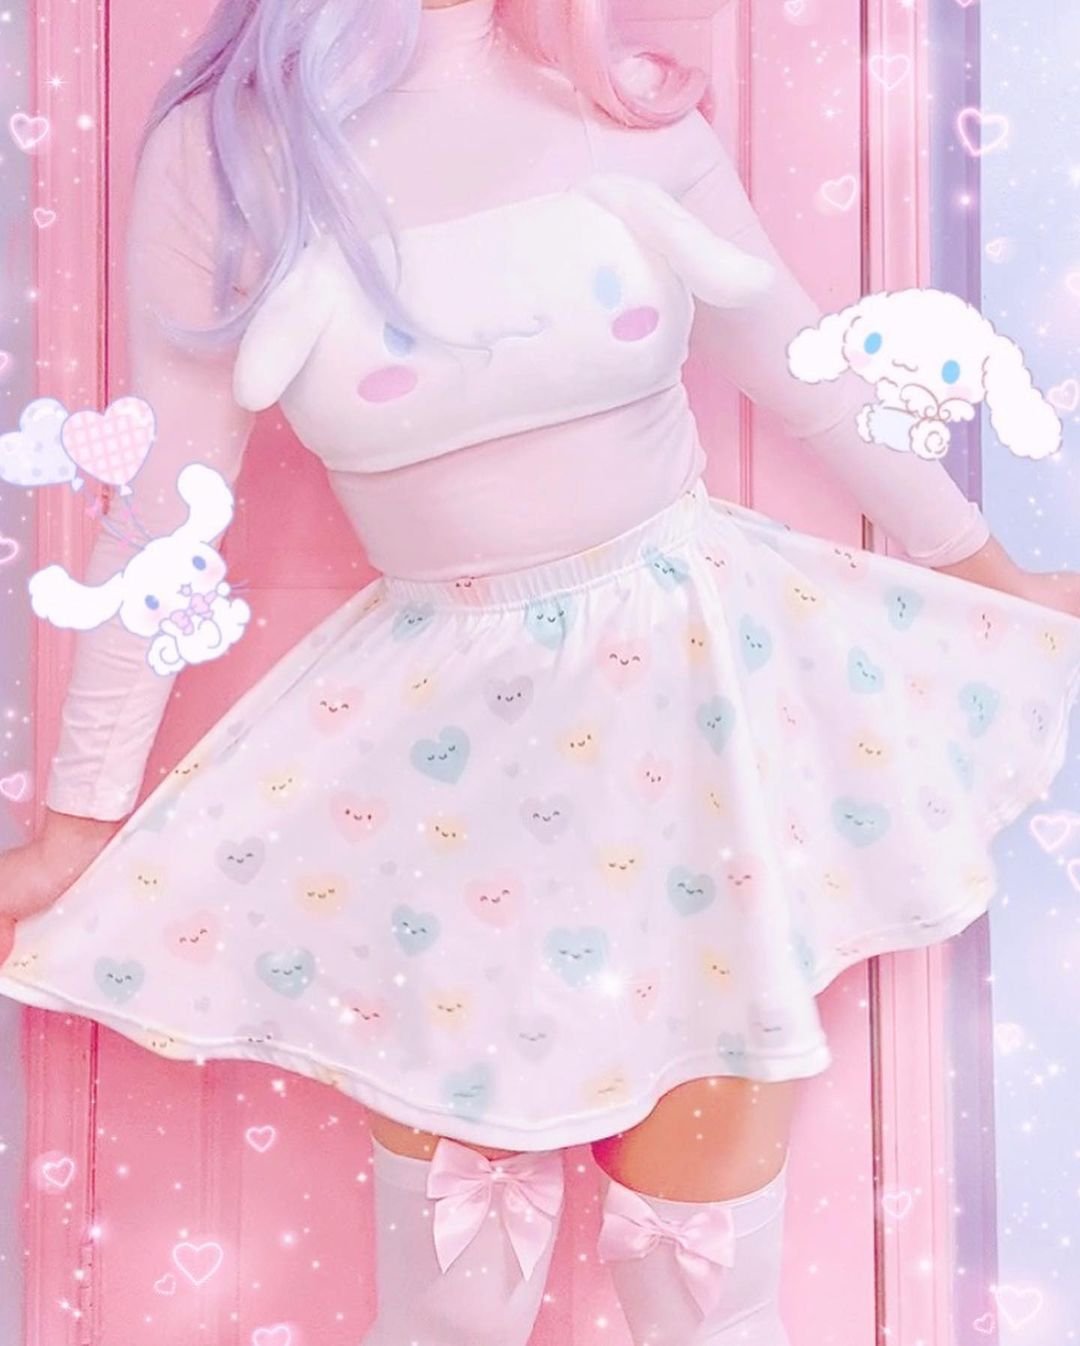 DDLG outfit